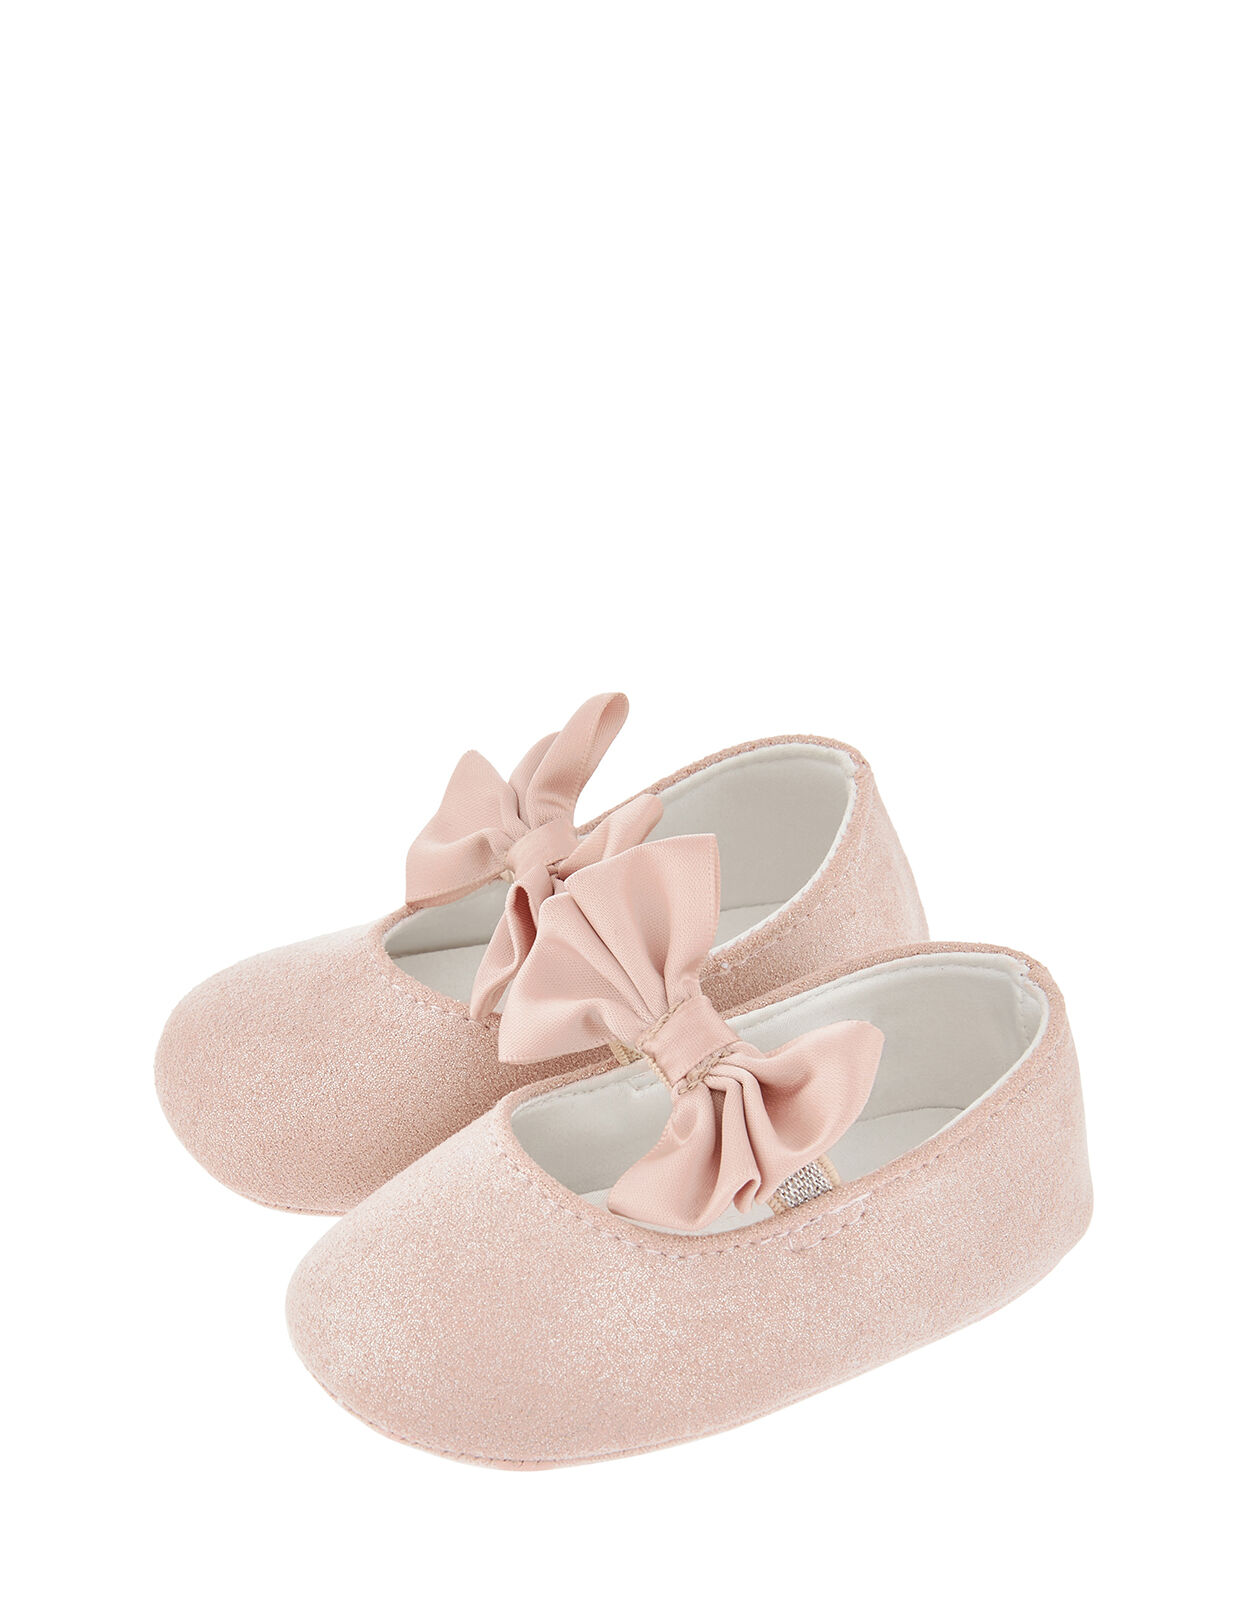 Baby Lottie Satin Bow Bootie Shoes Pink 